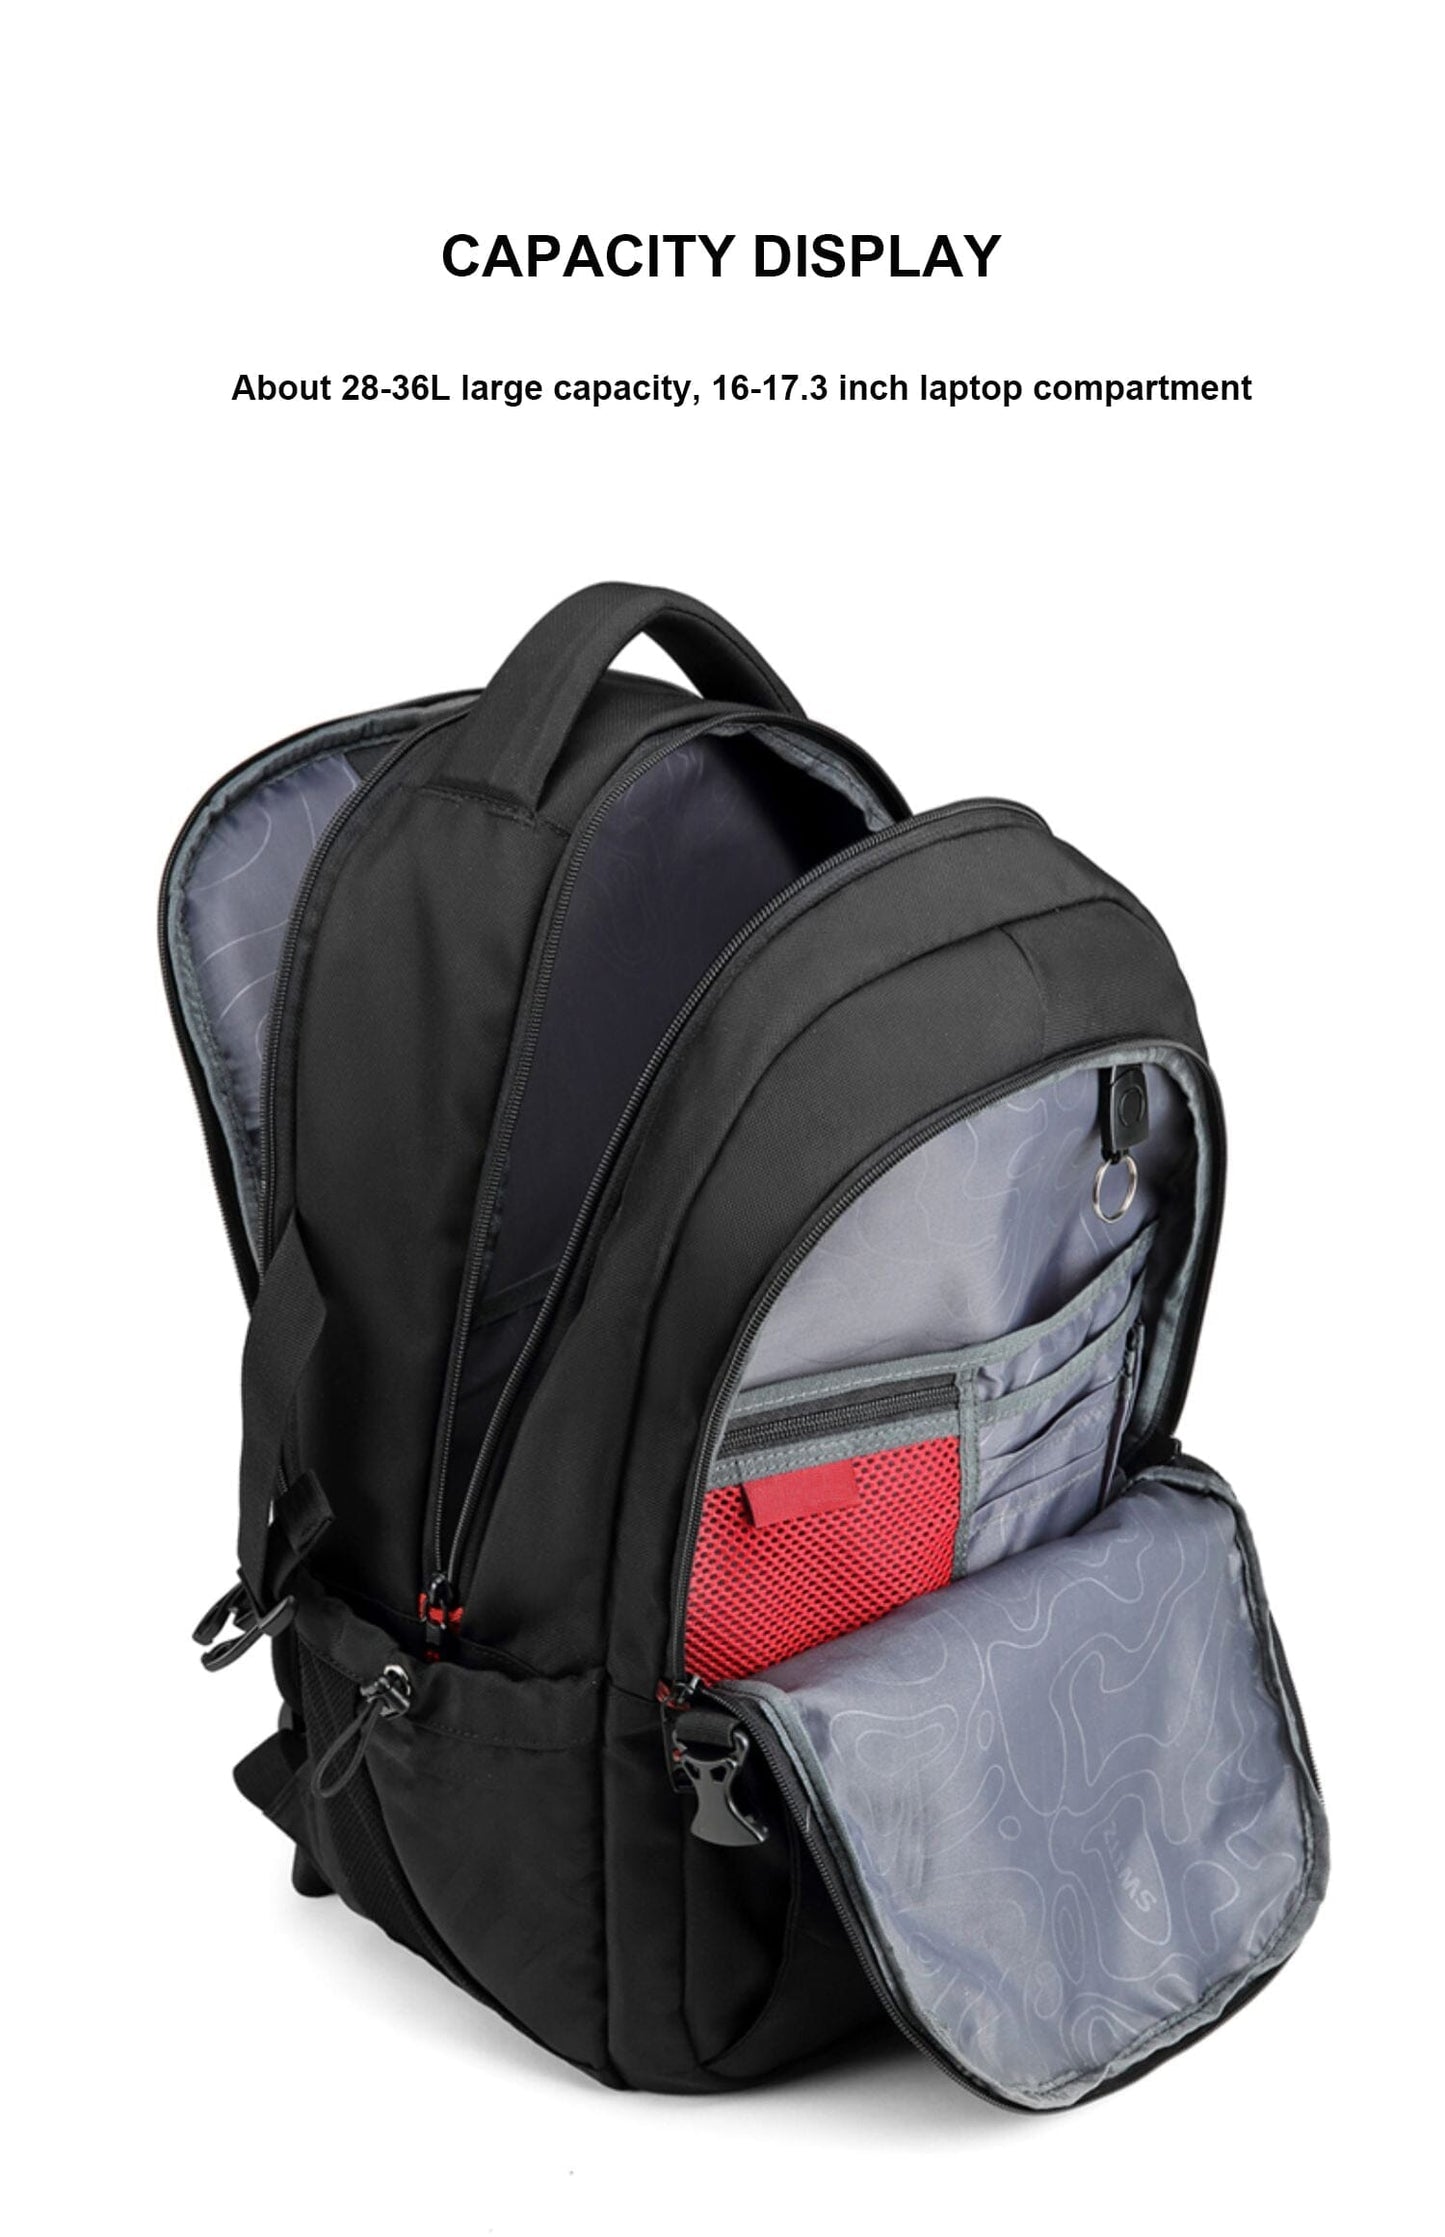 Backpack With Locking Zippers The Store Bags 